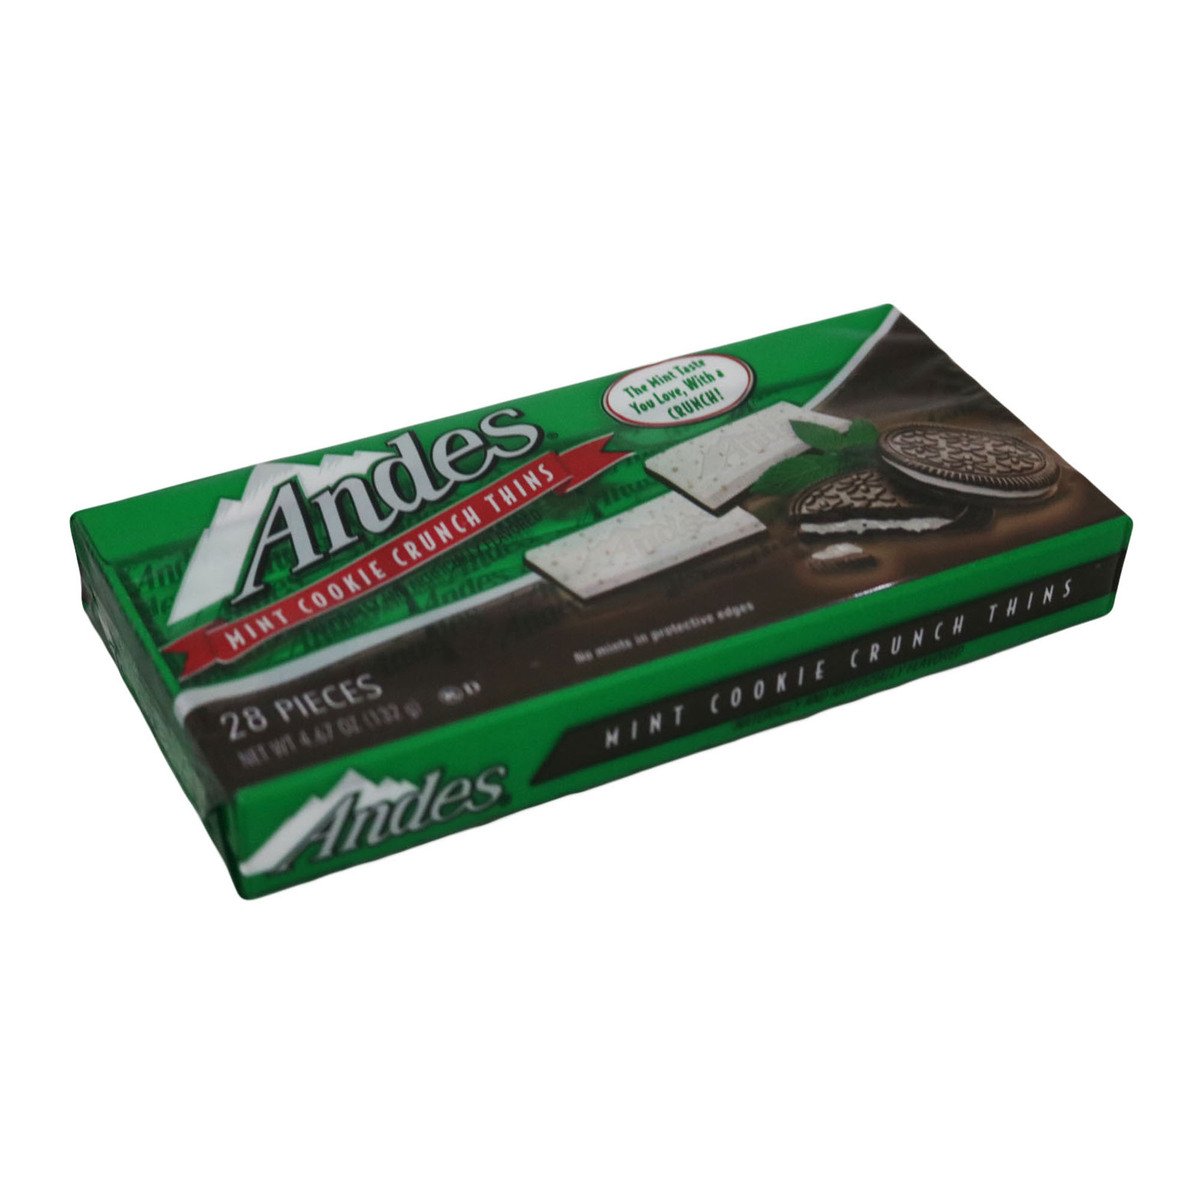 Andes Mint Cookies Crunch Thins 132g